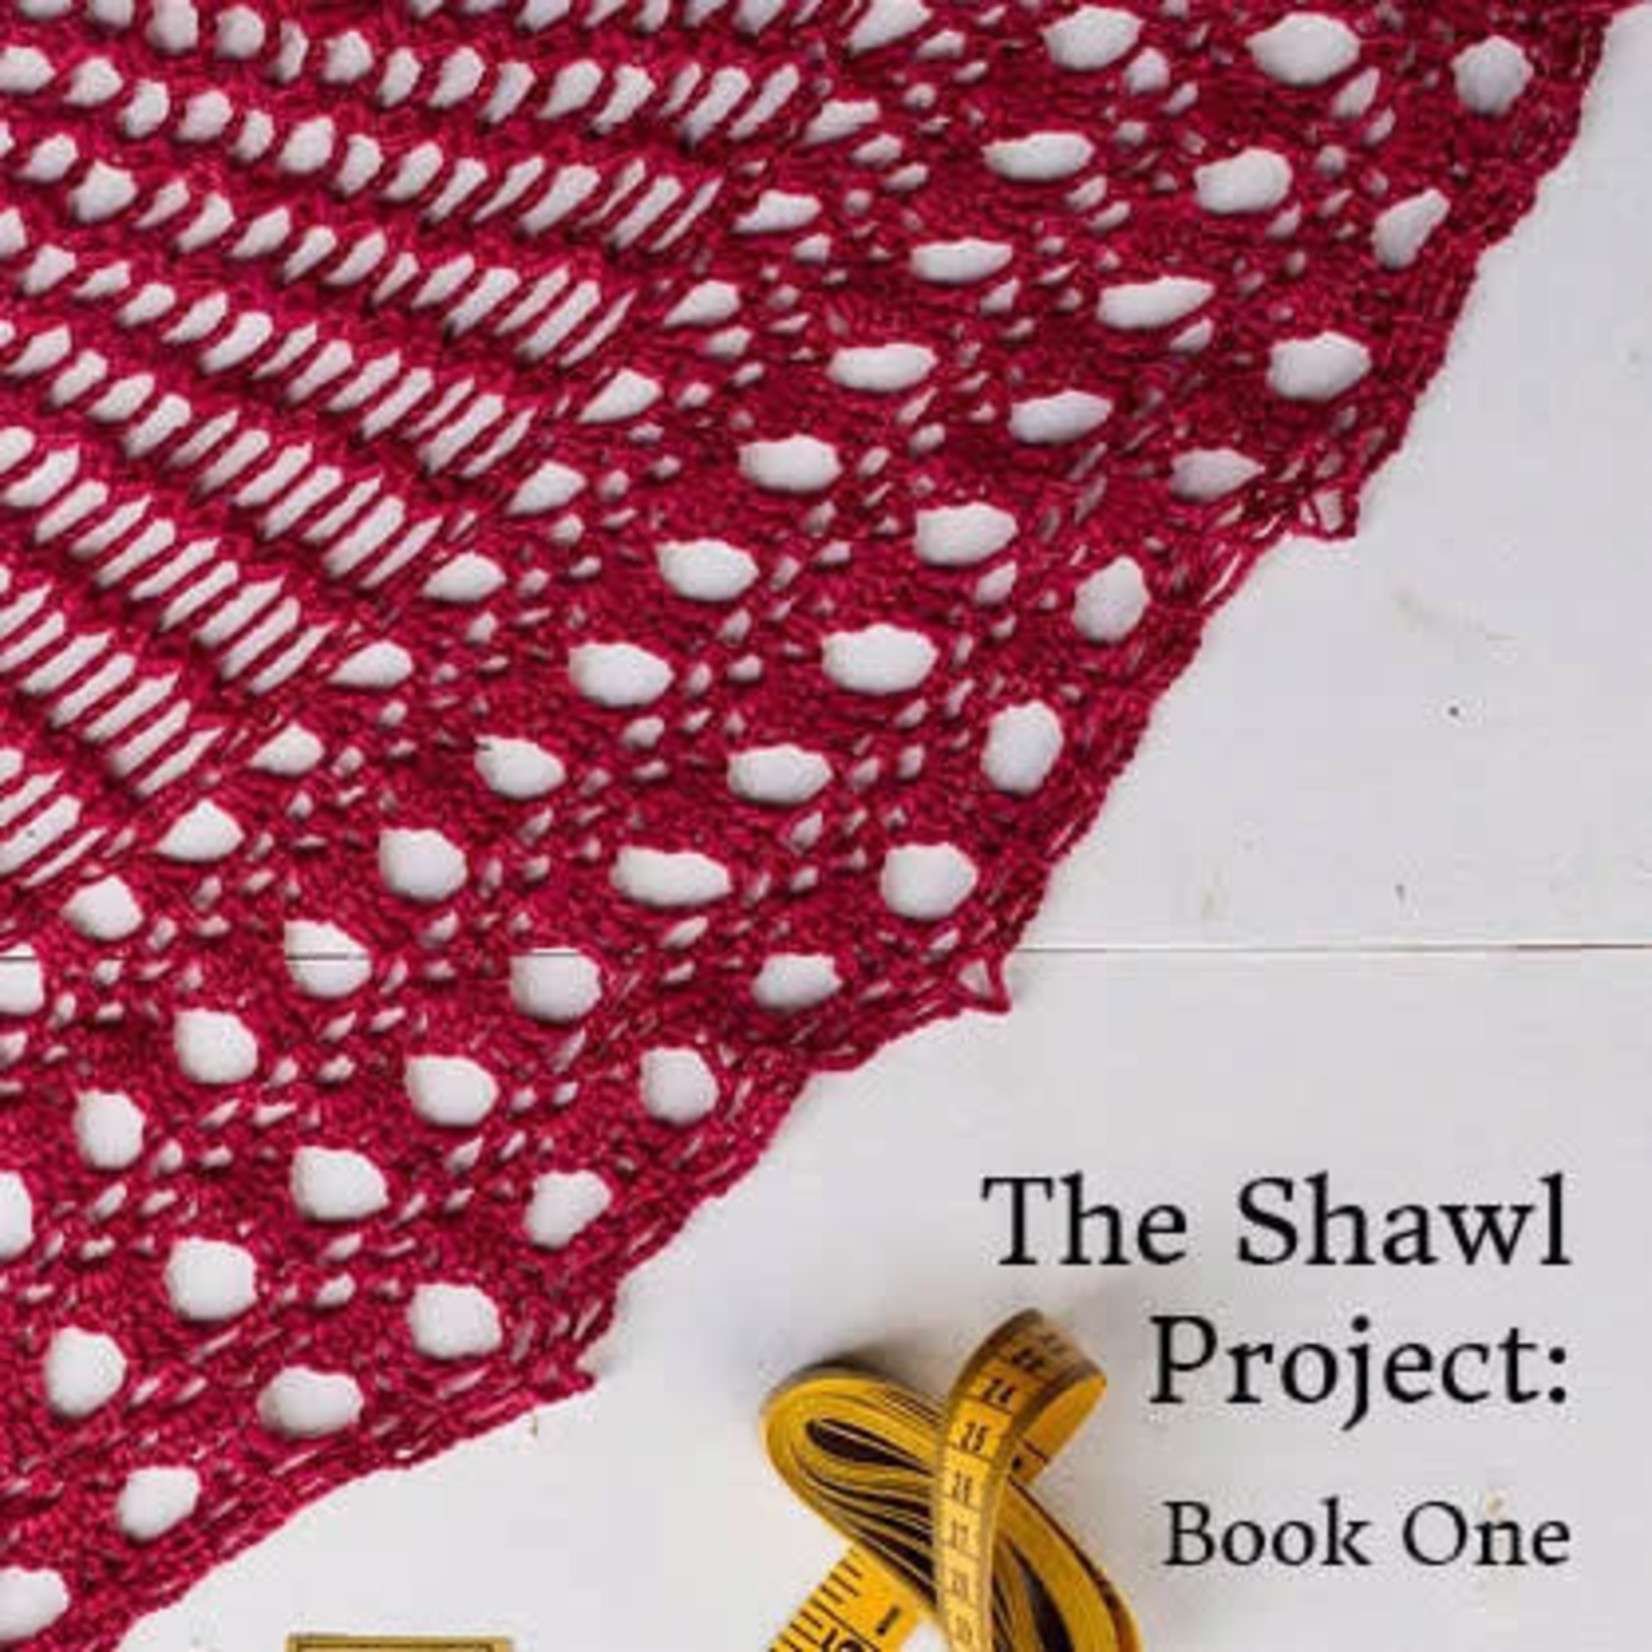 The Shawl Project: Book One (for Crochet)